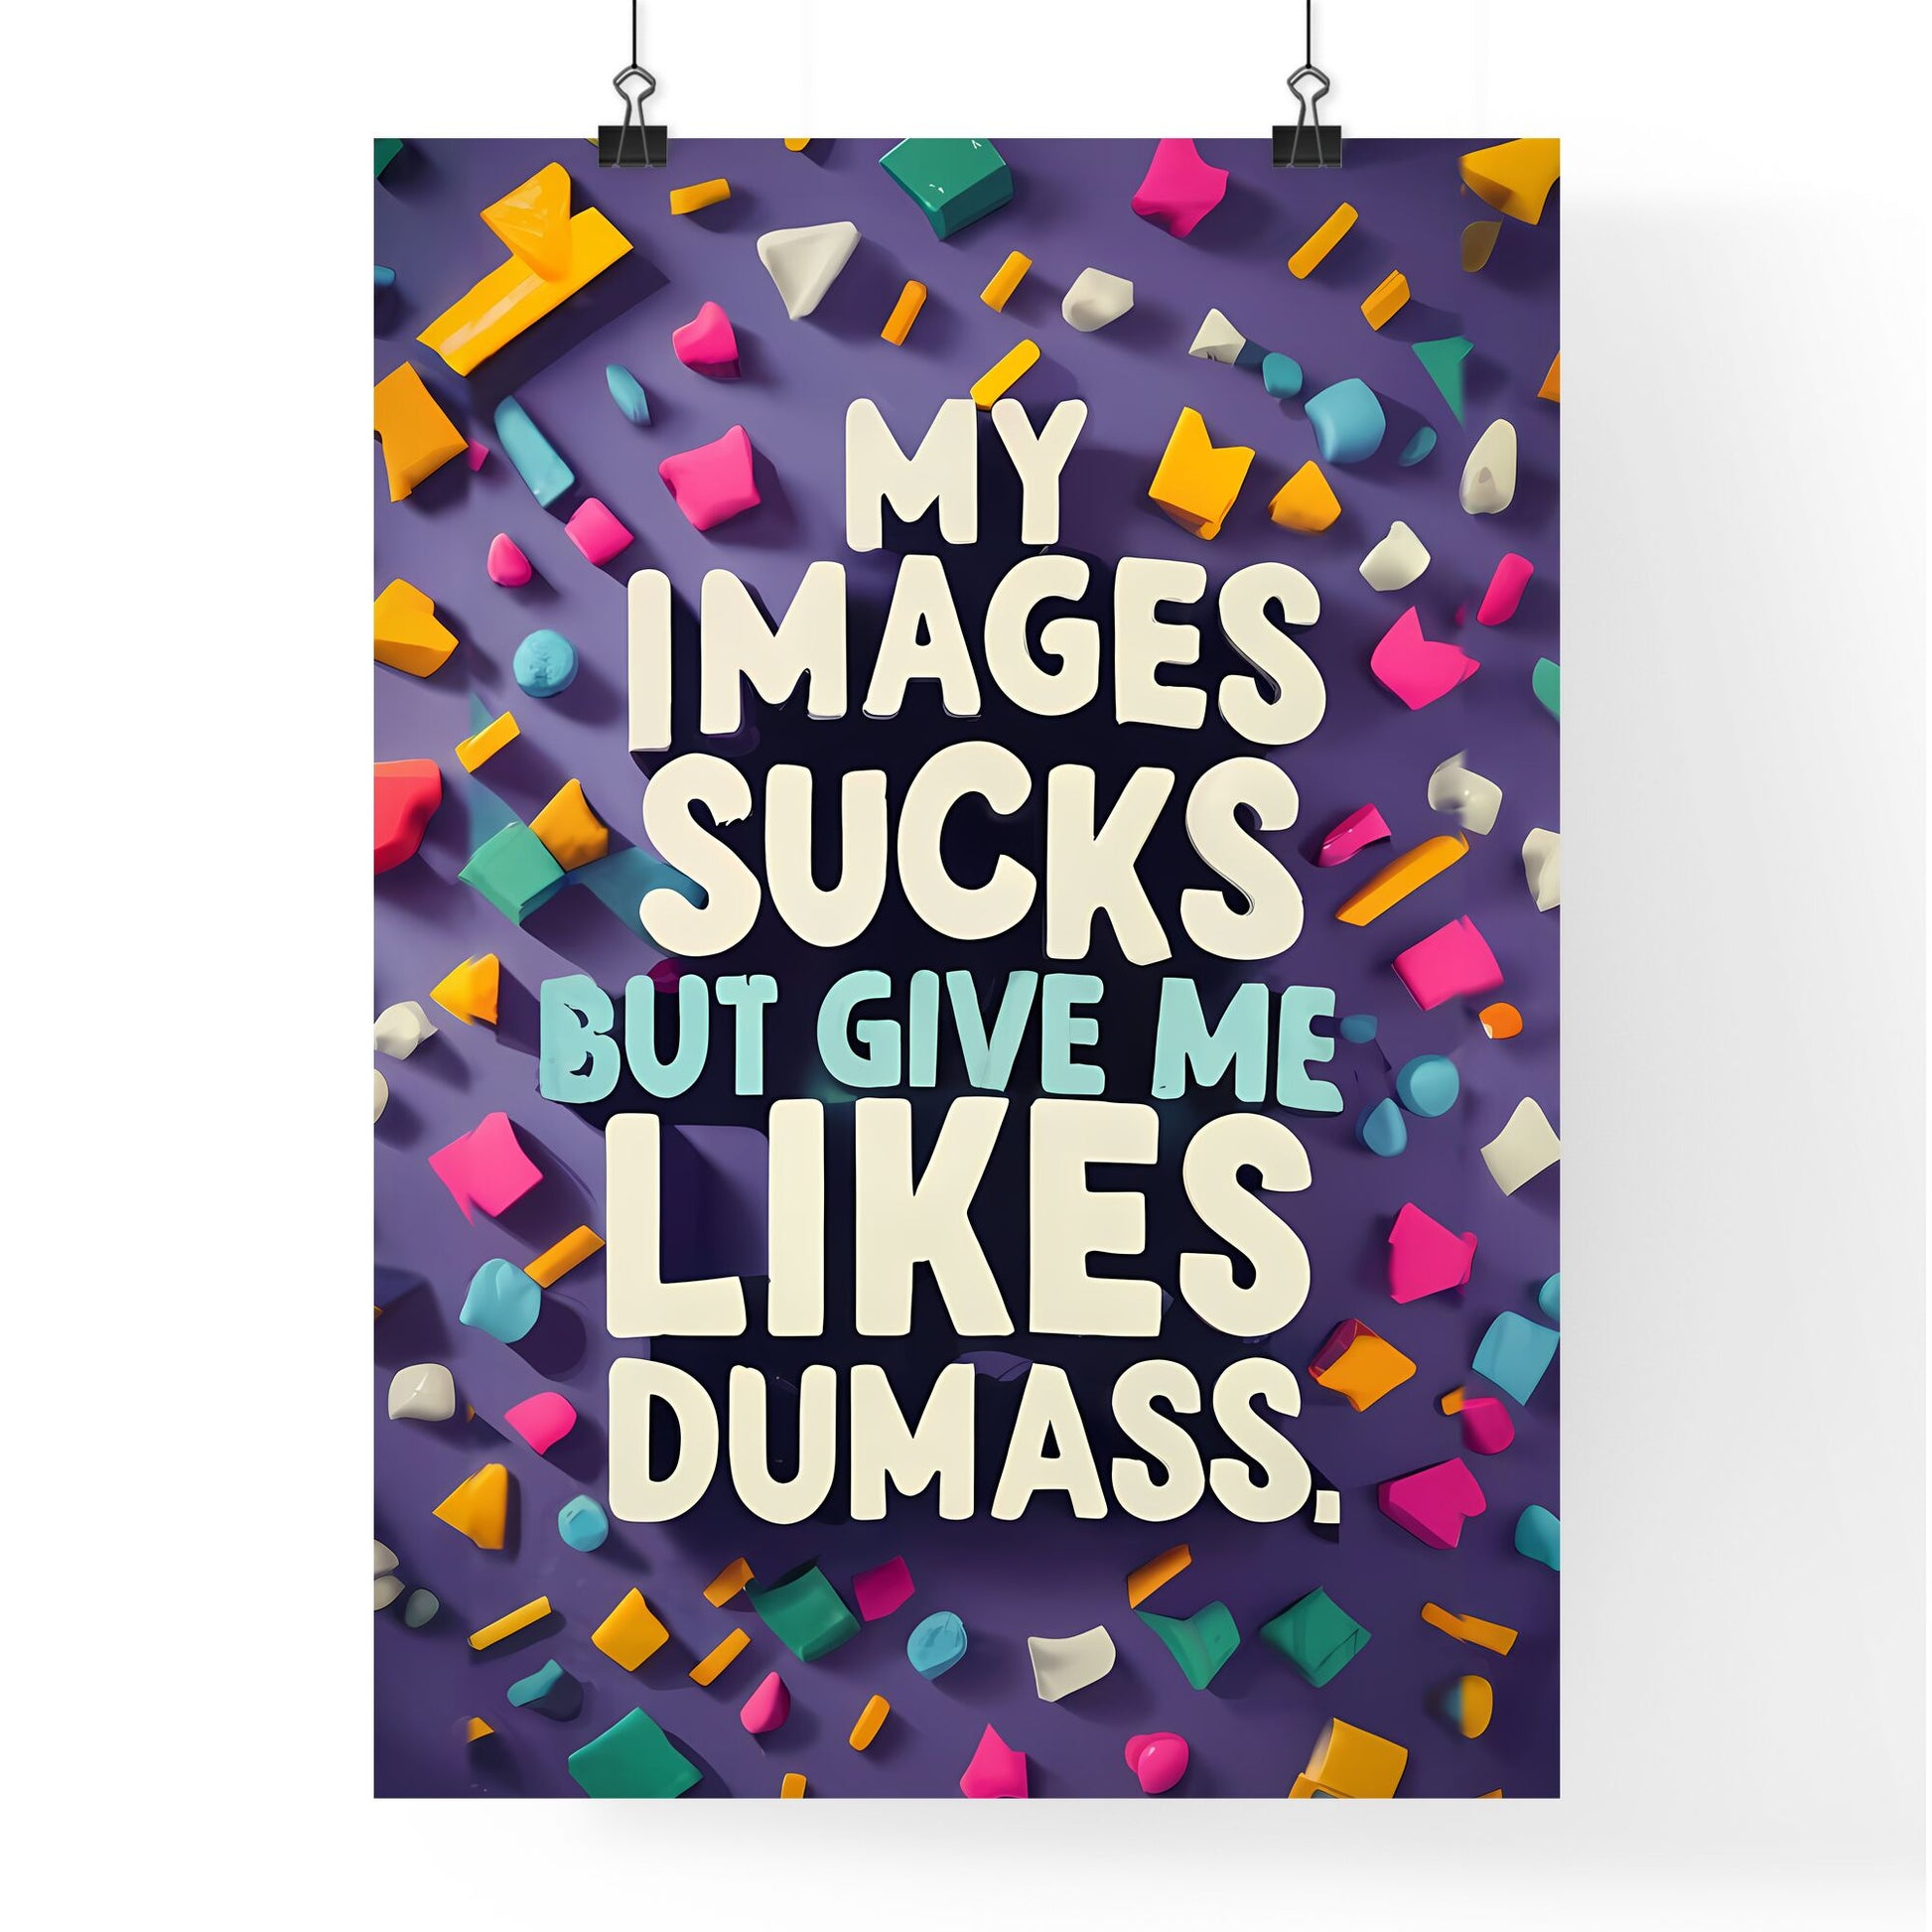 My Images Sucks - A Group Of Colorful Pieces Of Paper Default Title